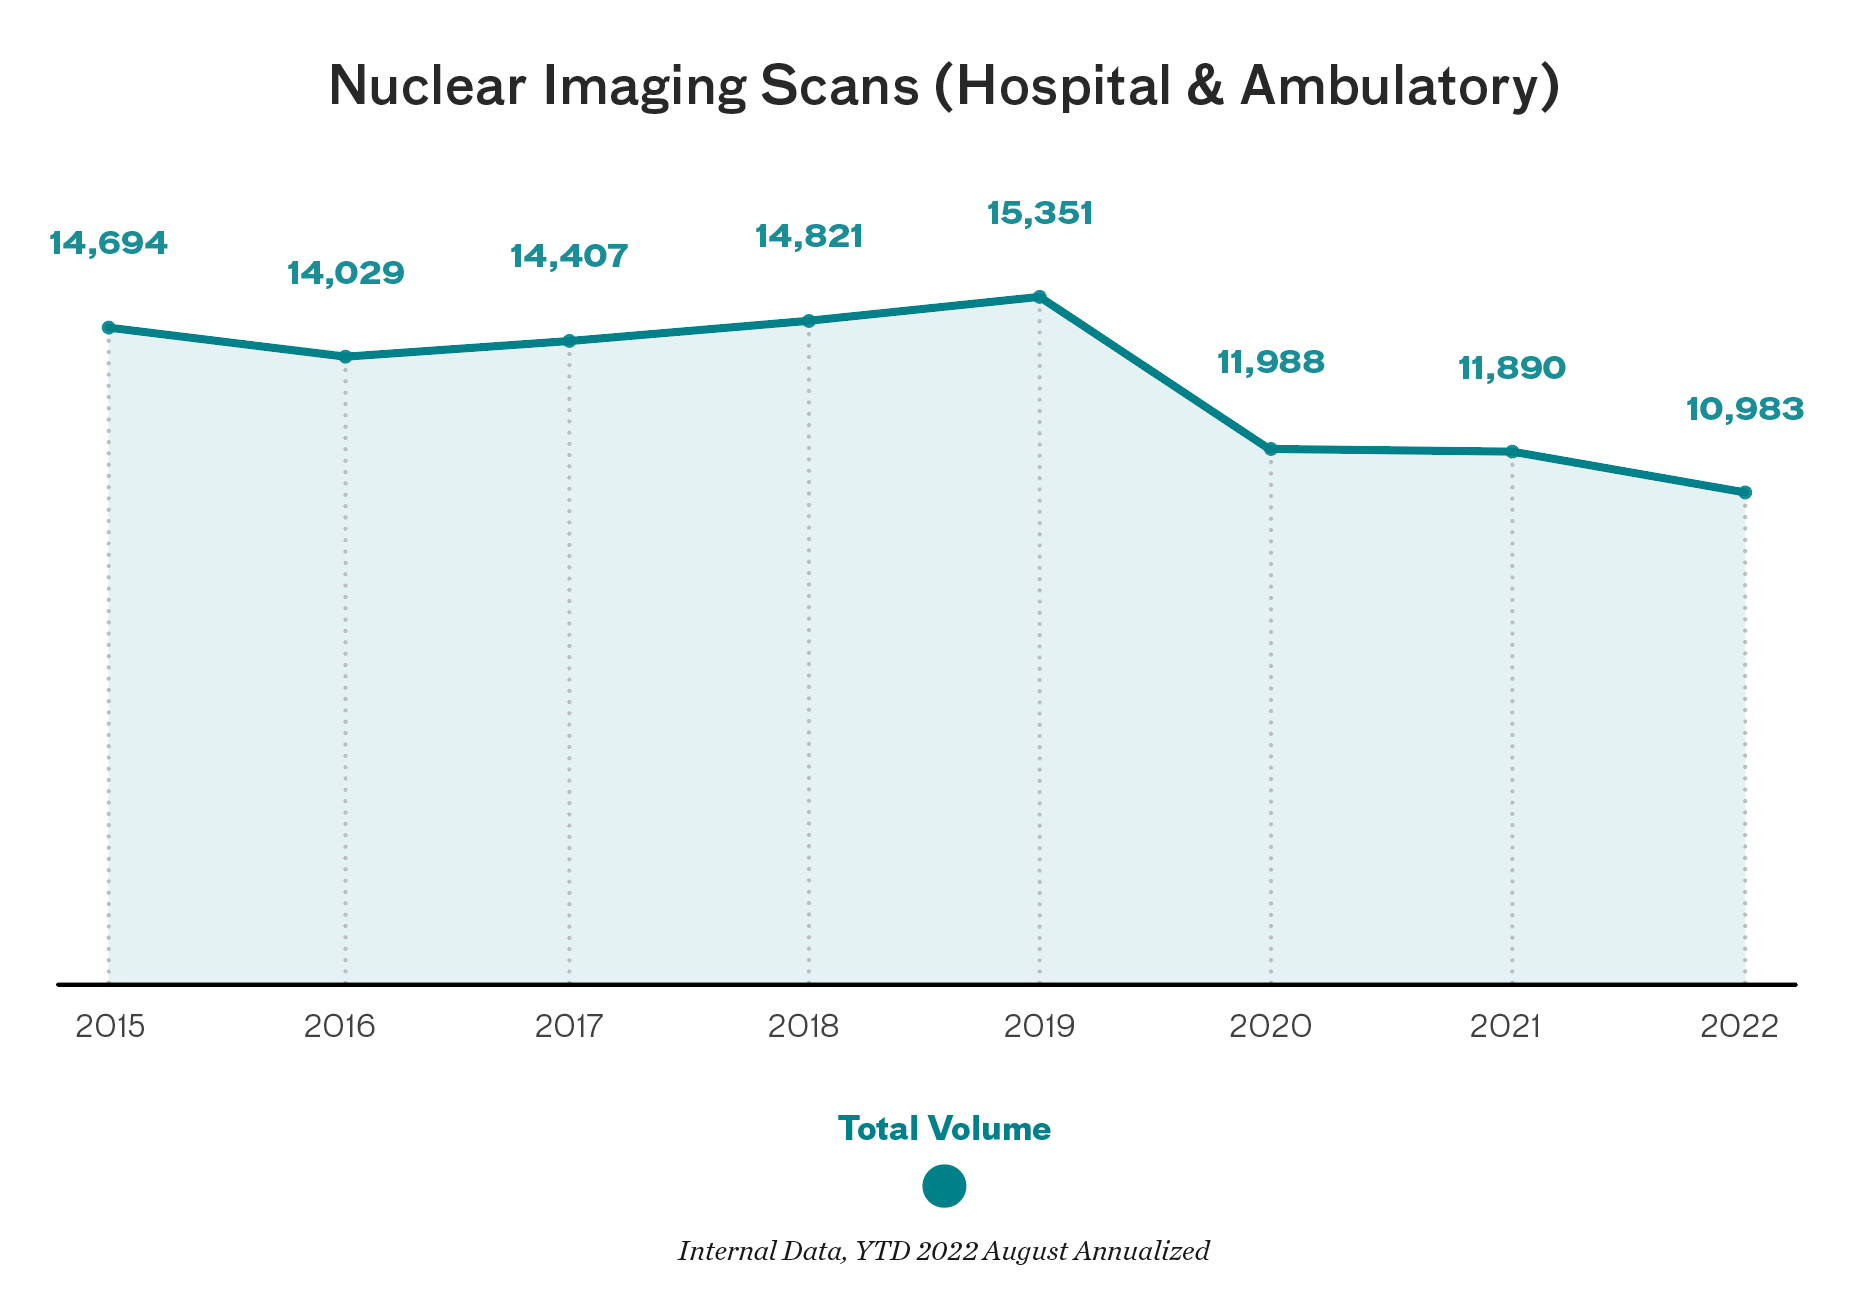 Chart showing a decrease in Nuclear Imaging Scans (Hospital & Ambulatory), from 14,694 in 2015, to 10,983 in 2022.